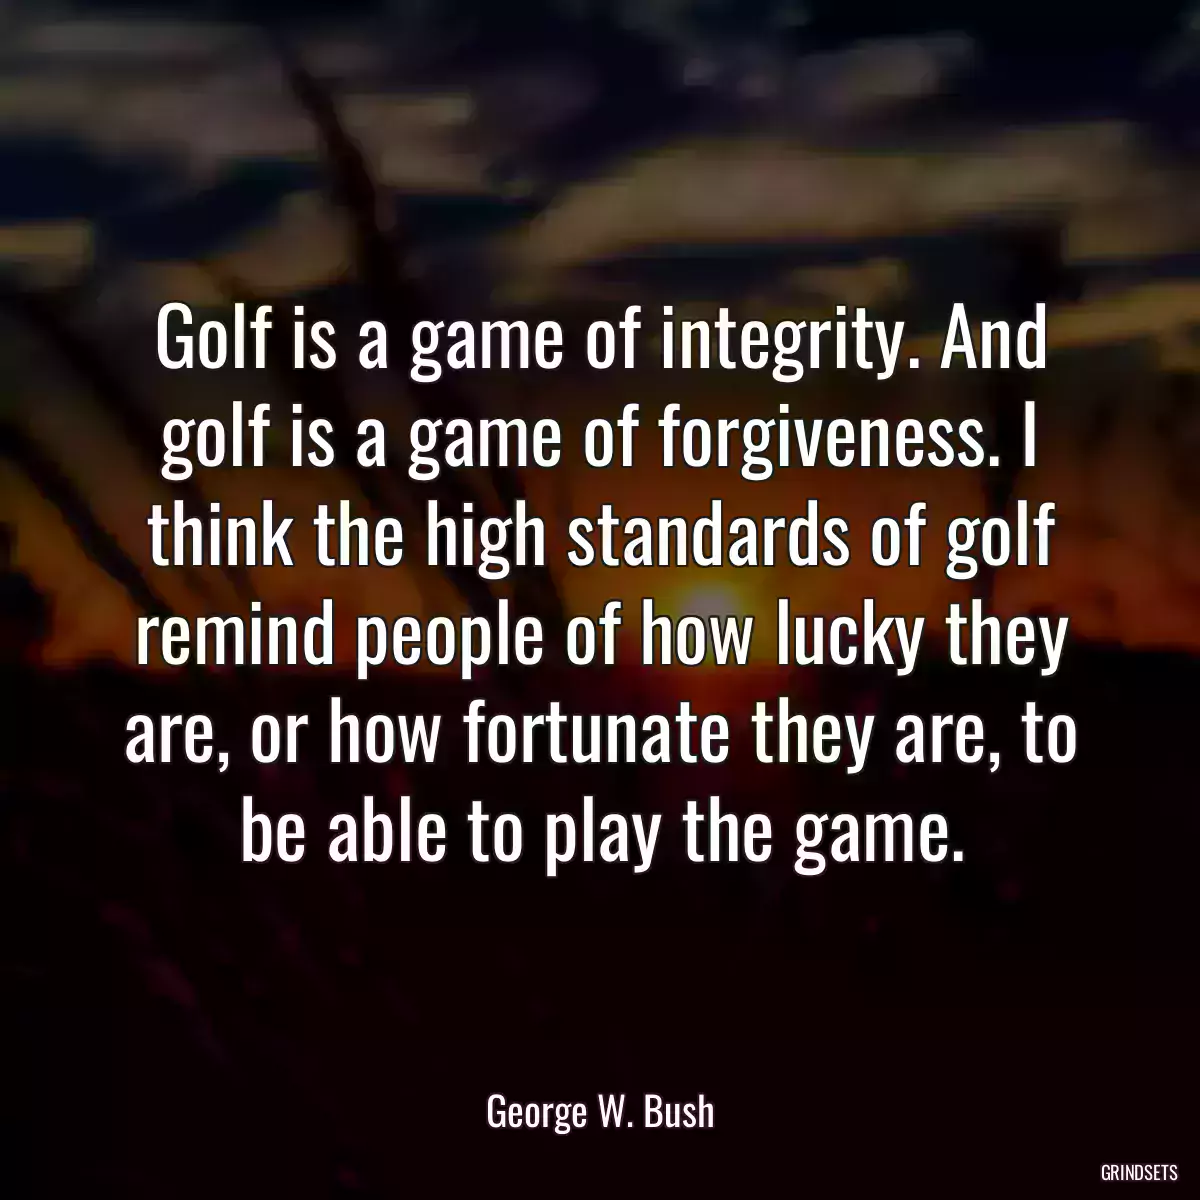 Golf is a game of integrity. And golf is a game of forgiveness. I think the high standards of golf remind people of how lucky they are, or how fortunate they are, to be able to play the game.